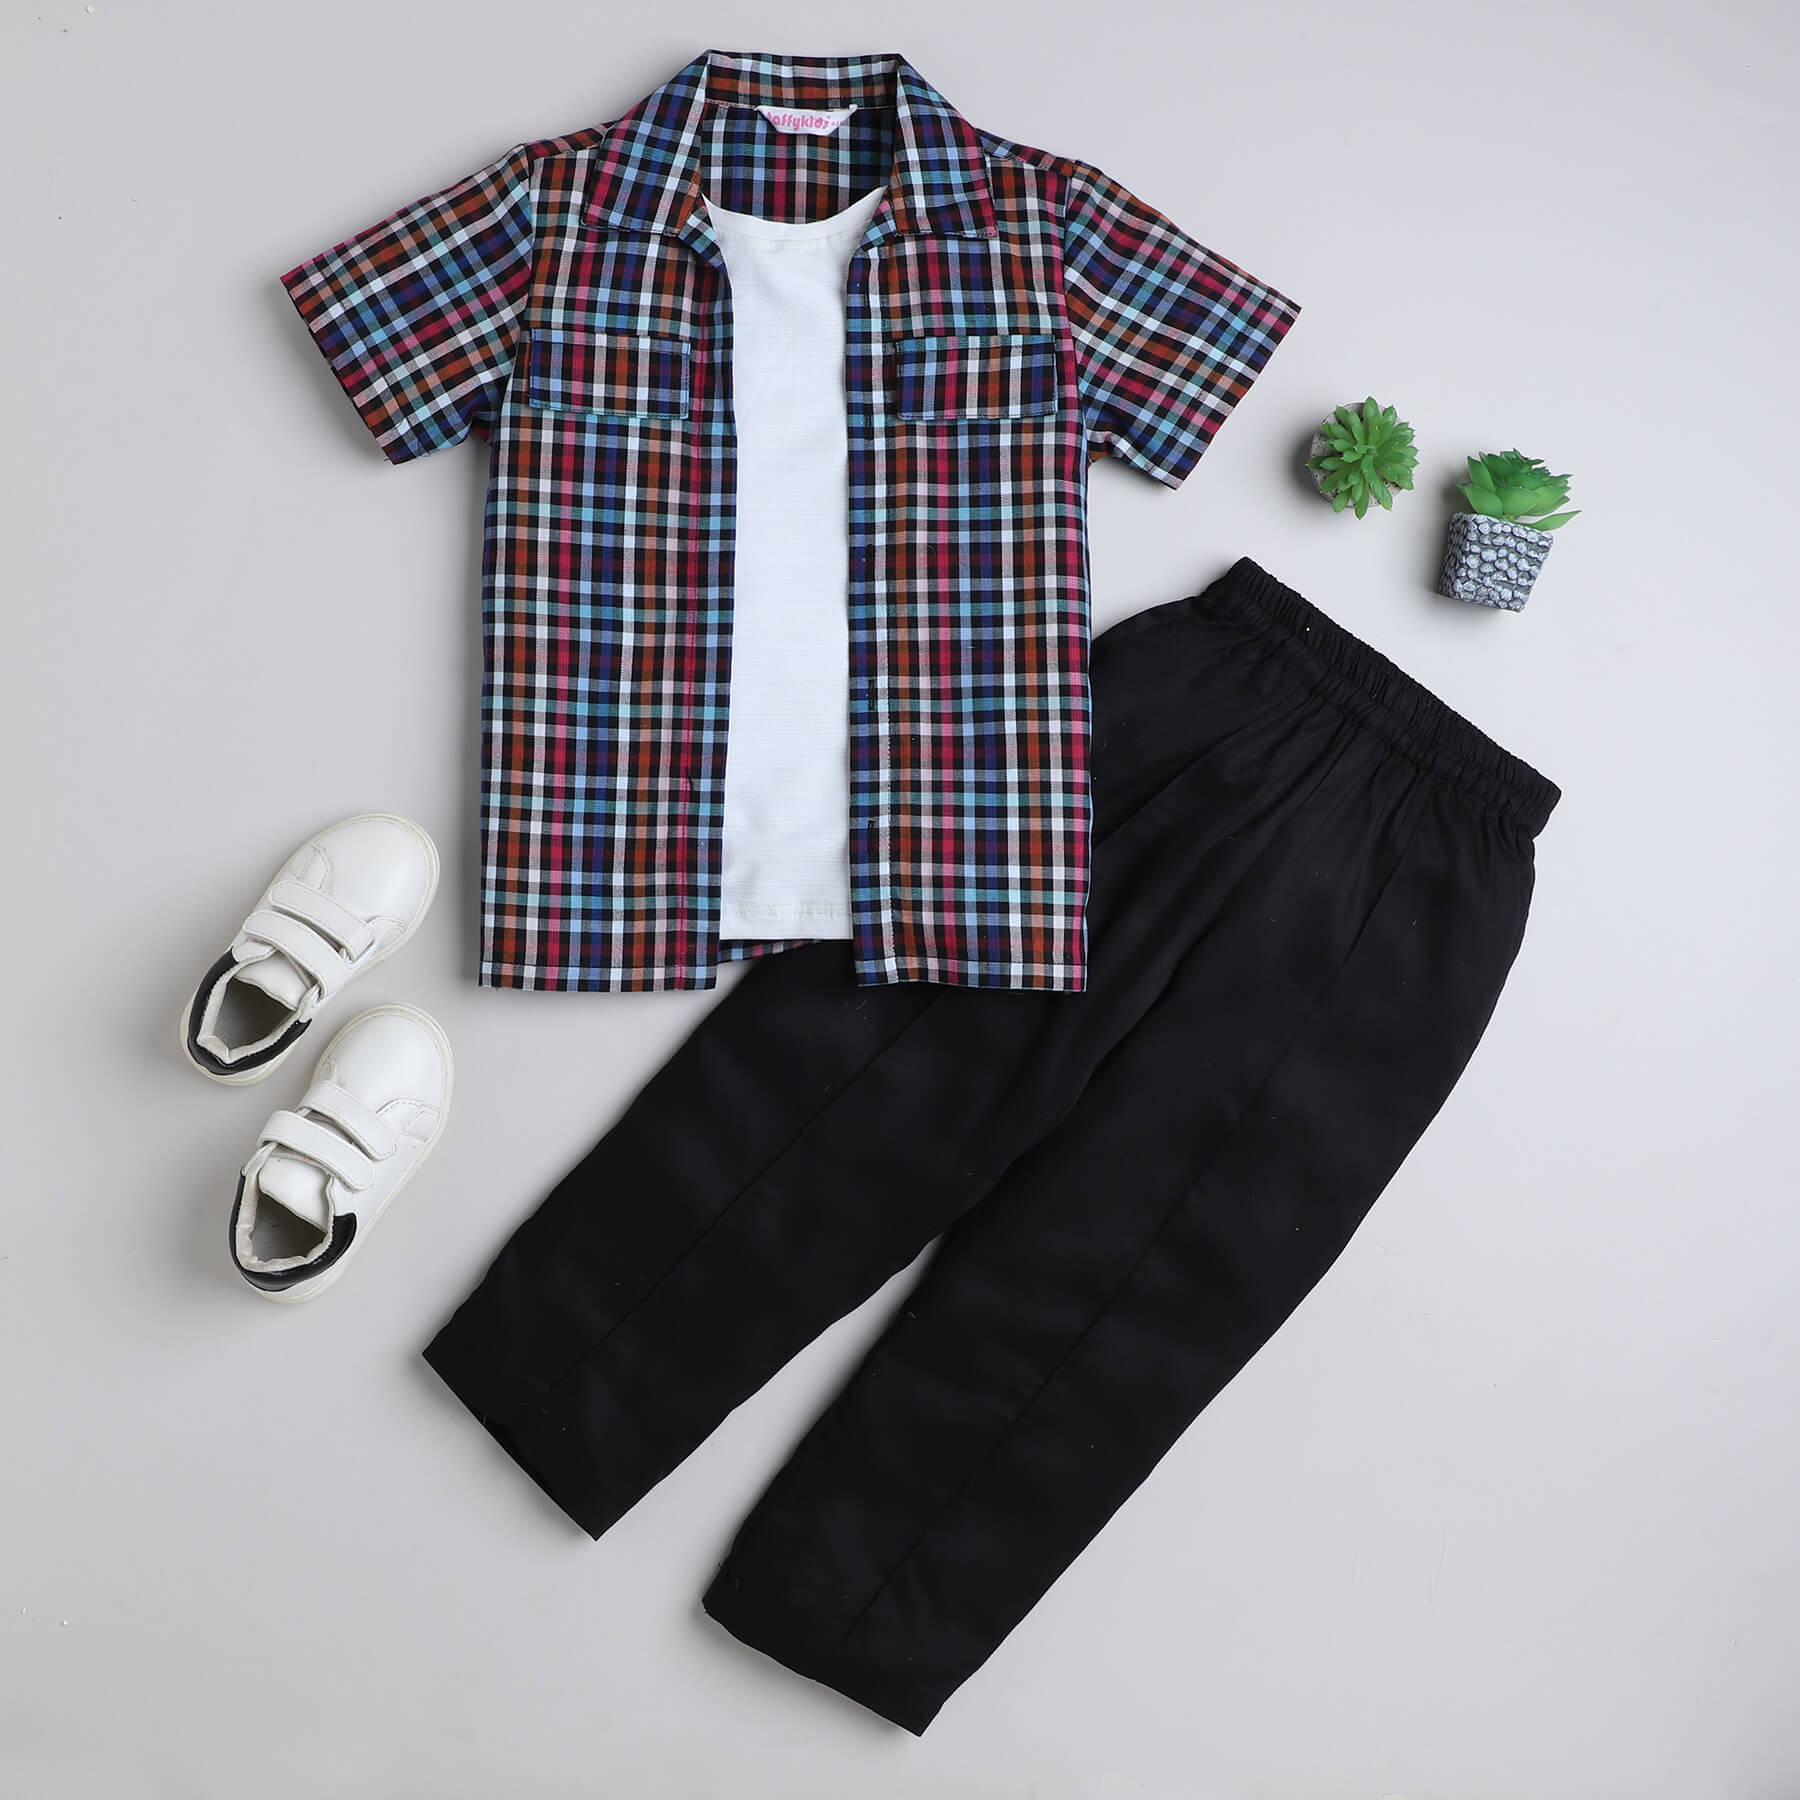 Taffykids yarn dyed checks half sleeves shirt with attached tee and solid pant set-Multi